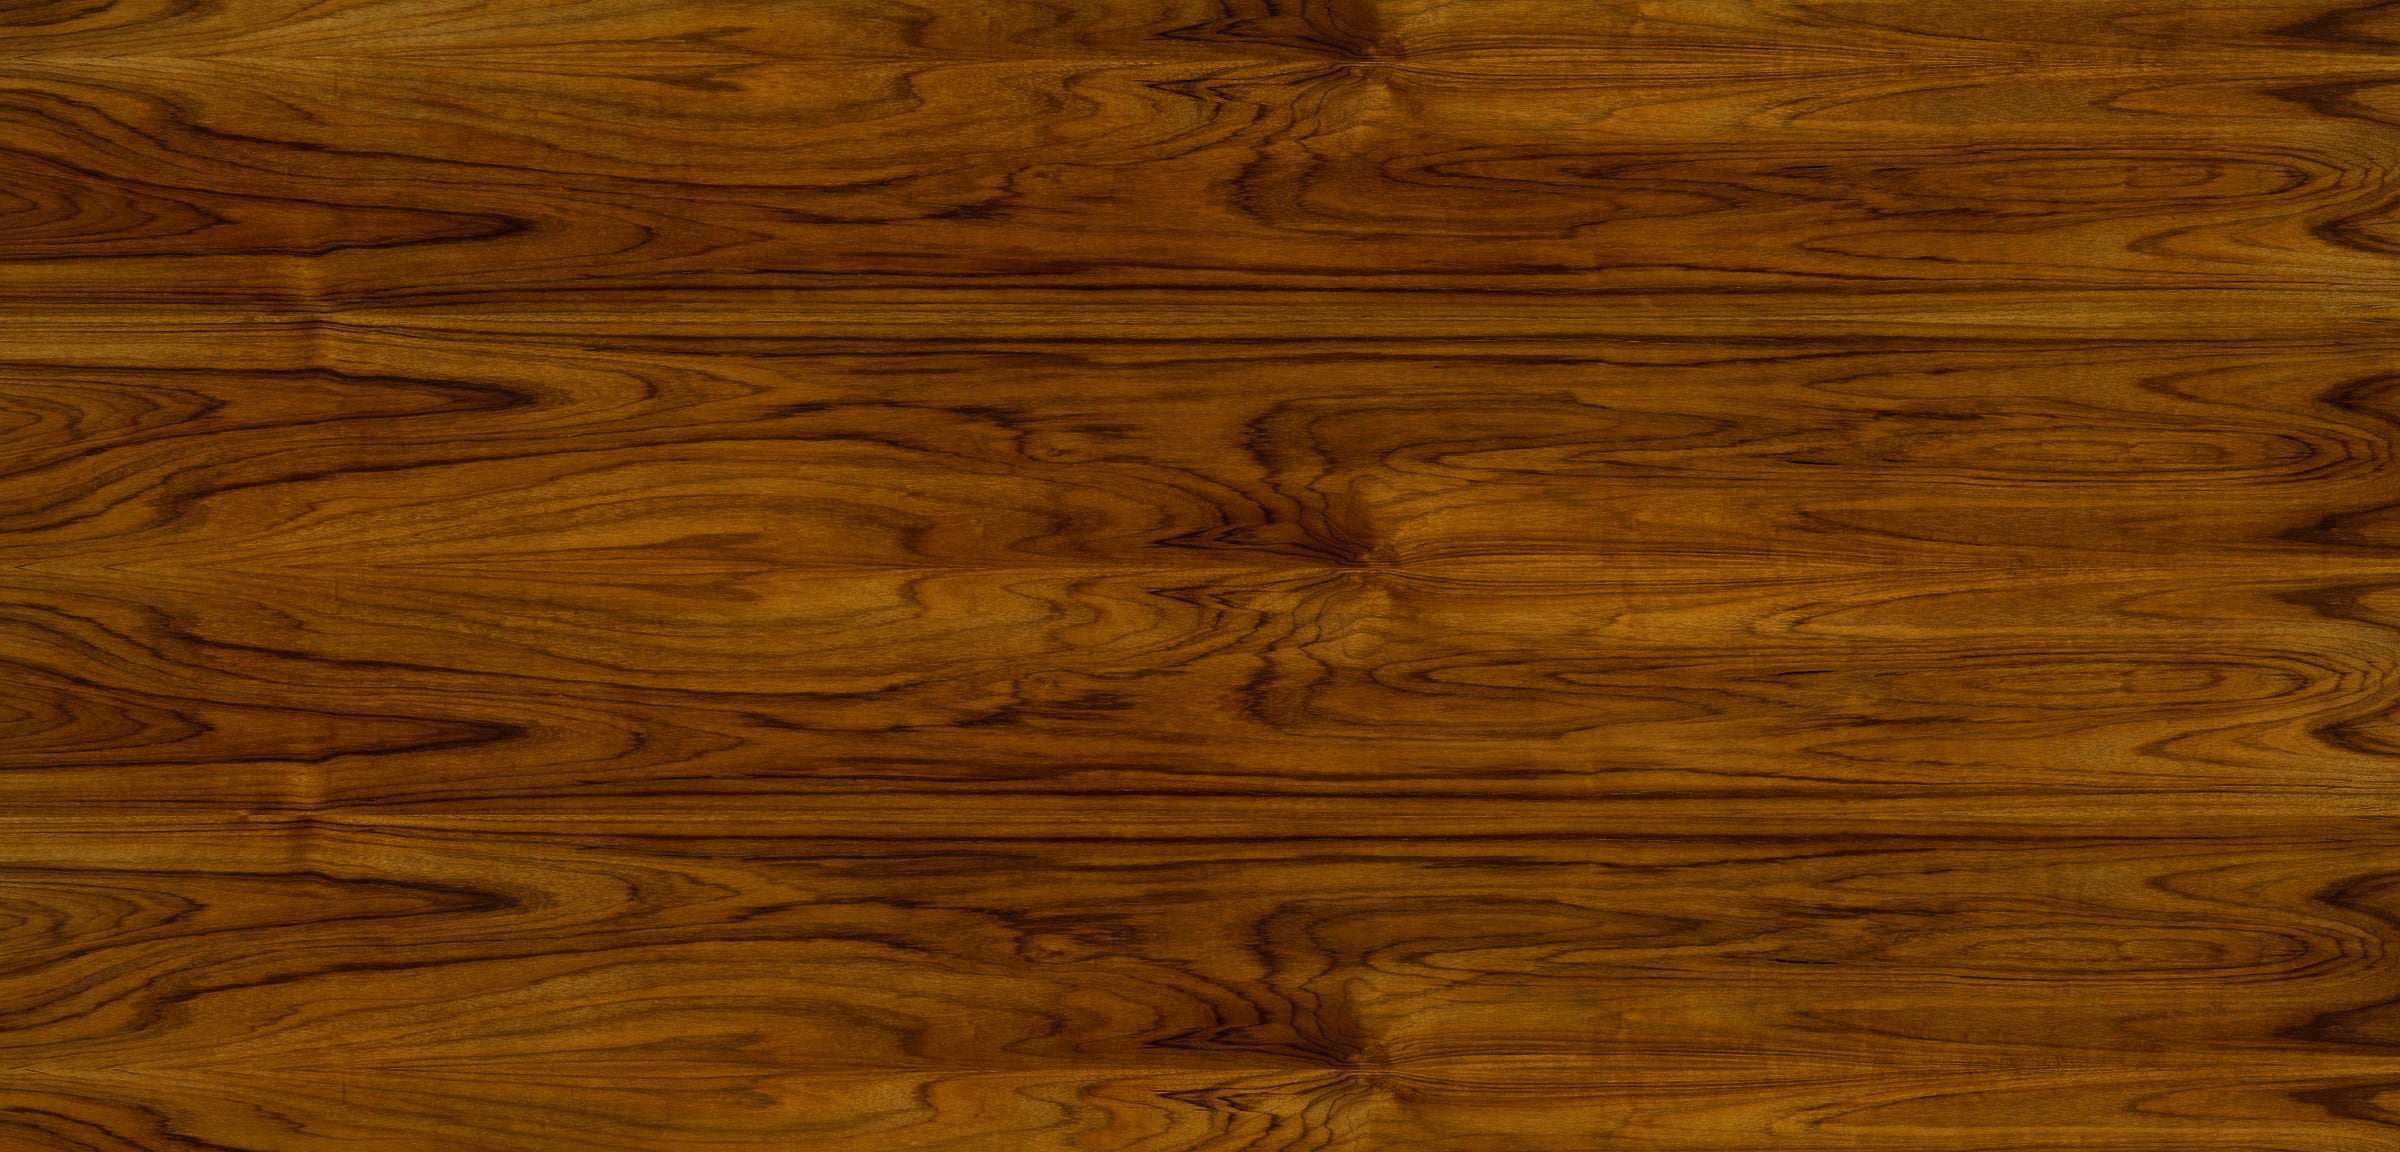 2,076 megapixels! An ultra-high-resolution texture photo file of oiled rare teak wood; gigapixel photograph created by David Lineton.